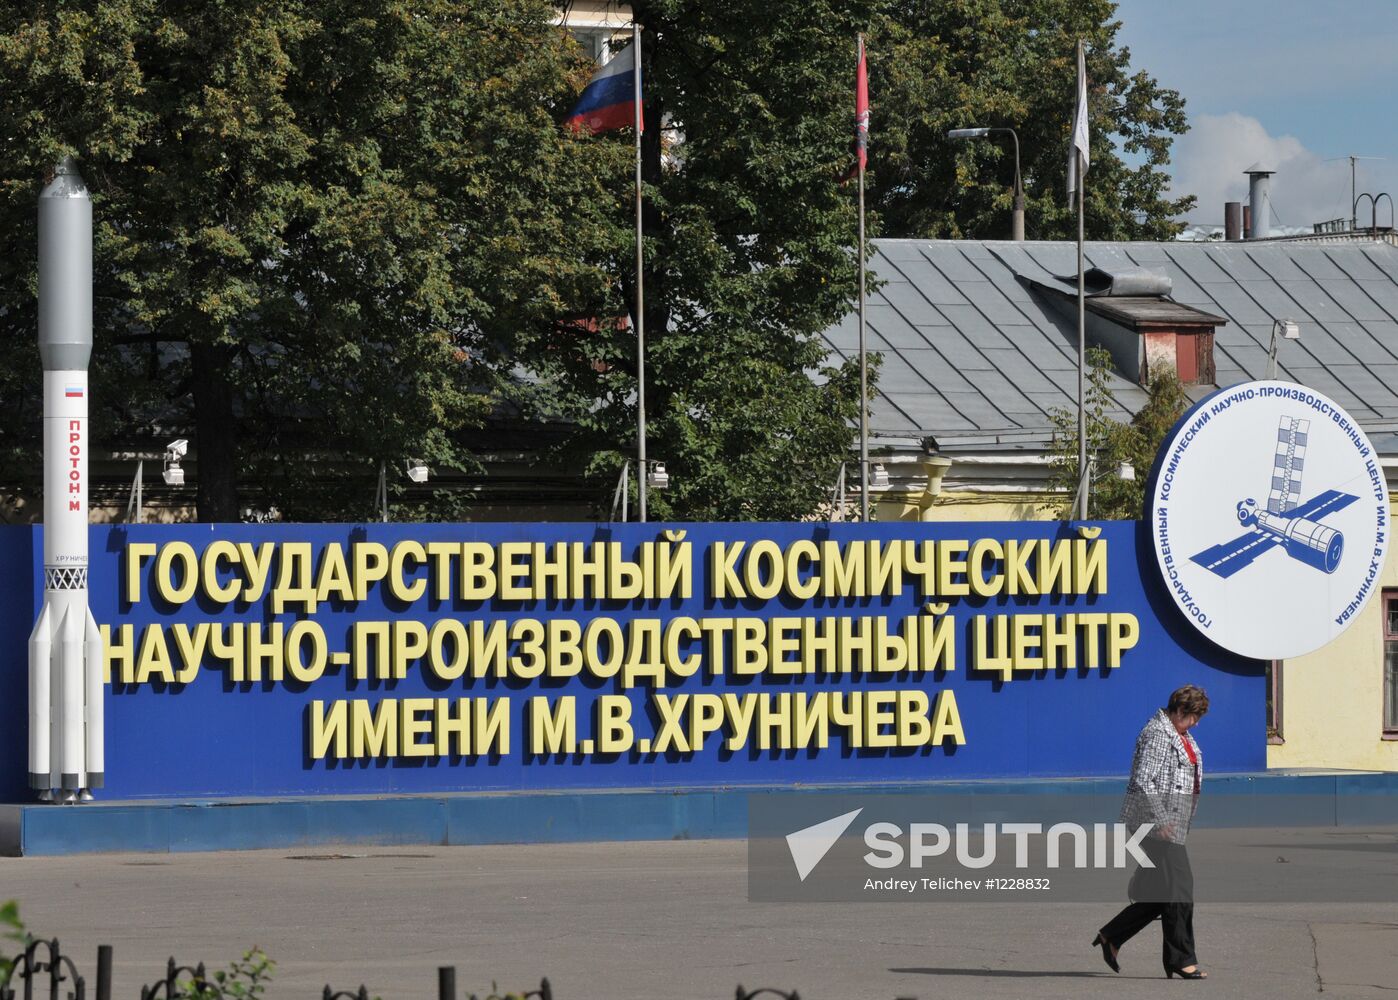 Khrunichev State Research and Production Space Center